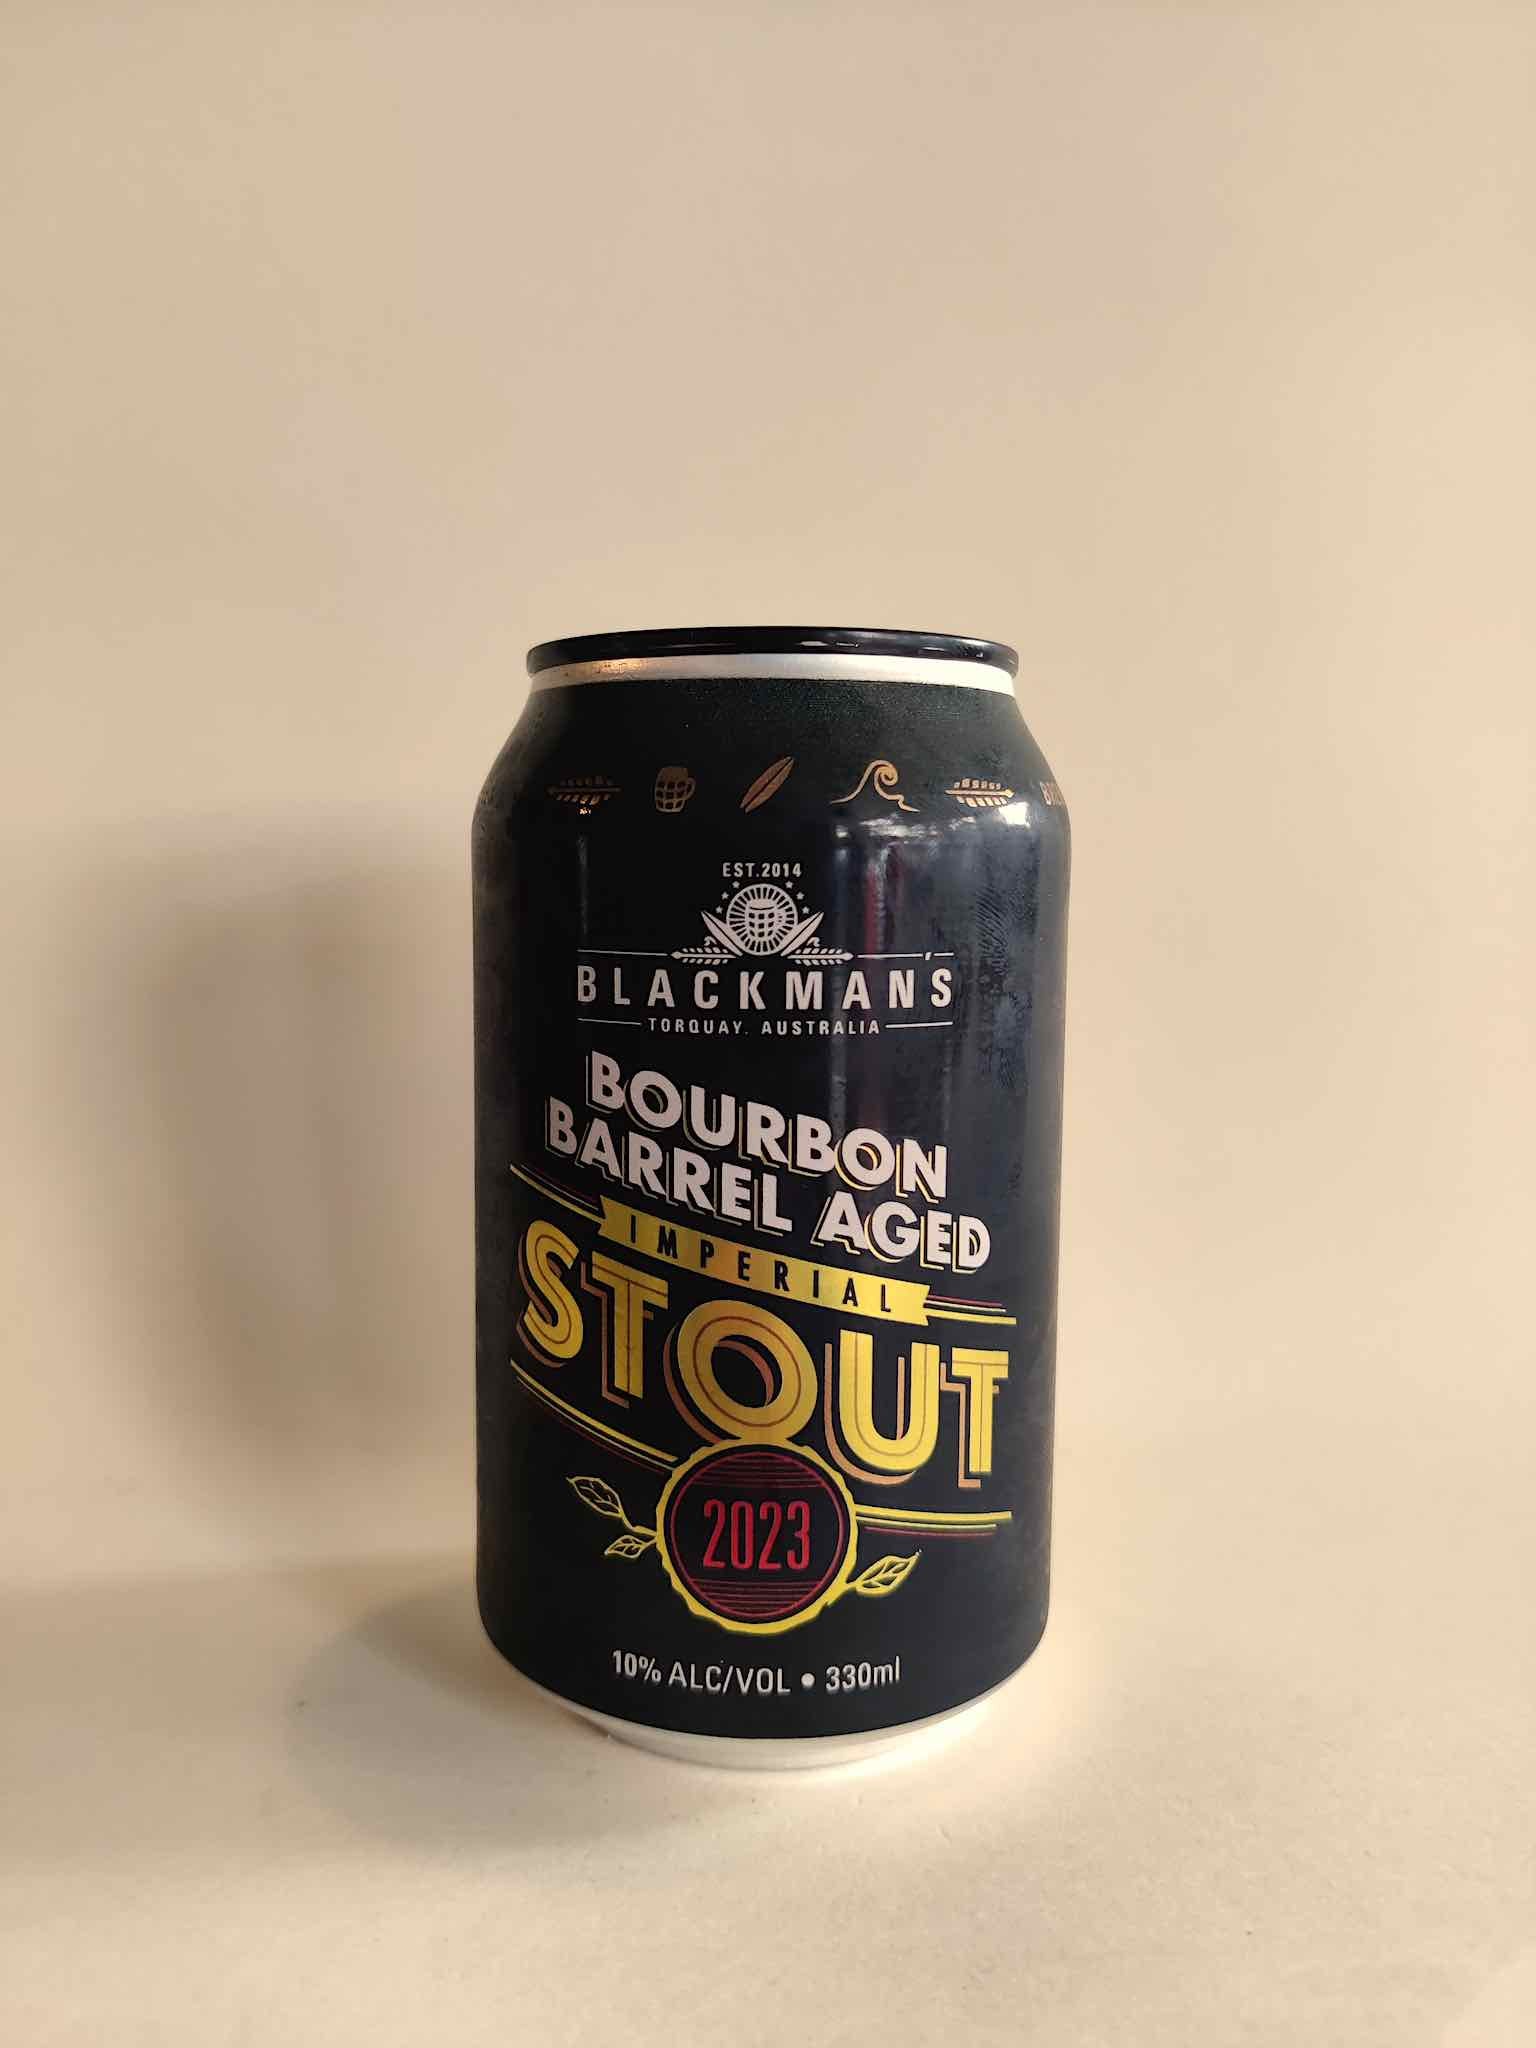 A 330ml can of Blackman's Bourbon Barrel Aged Imperial Stout. 